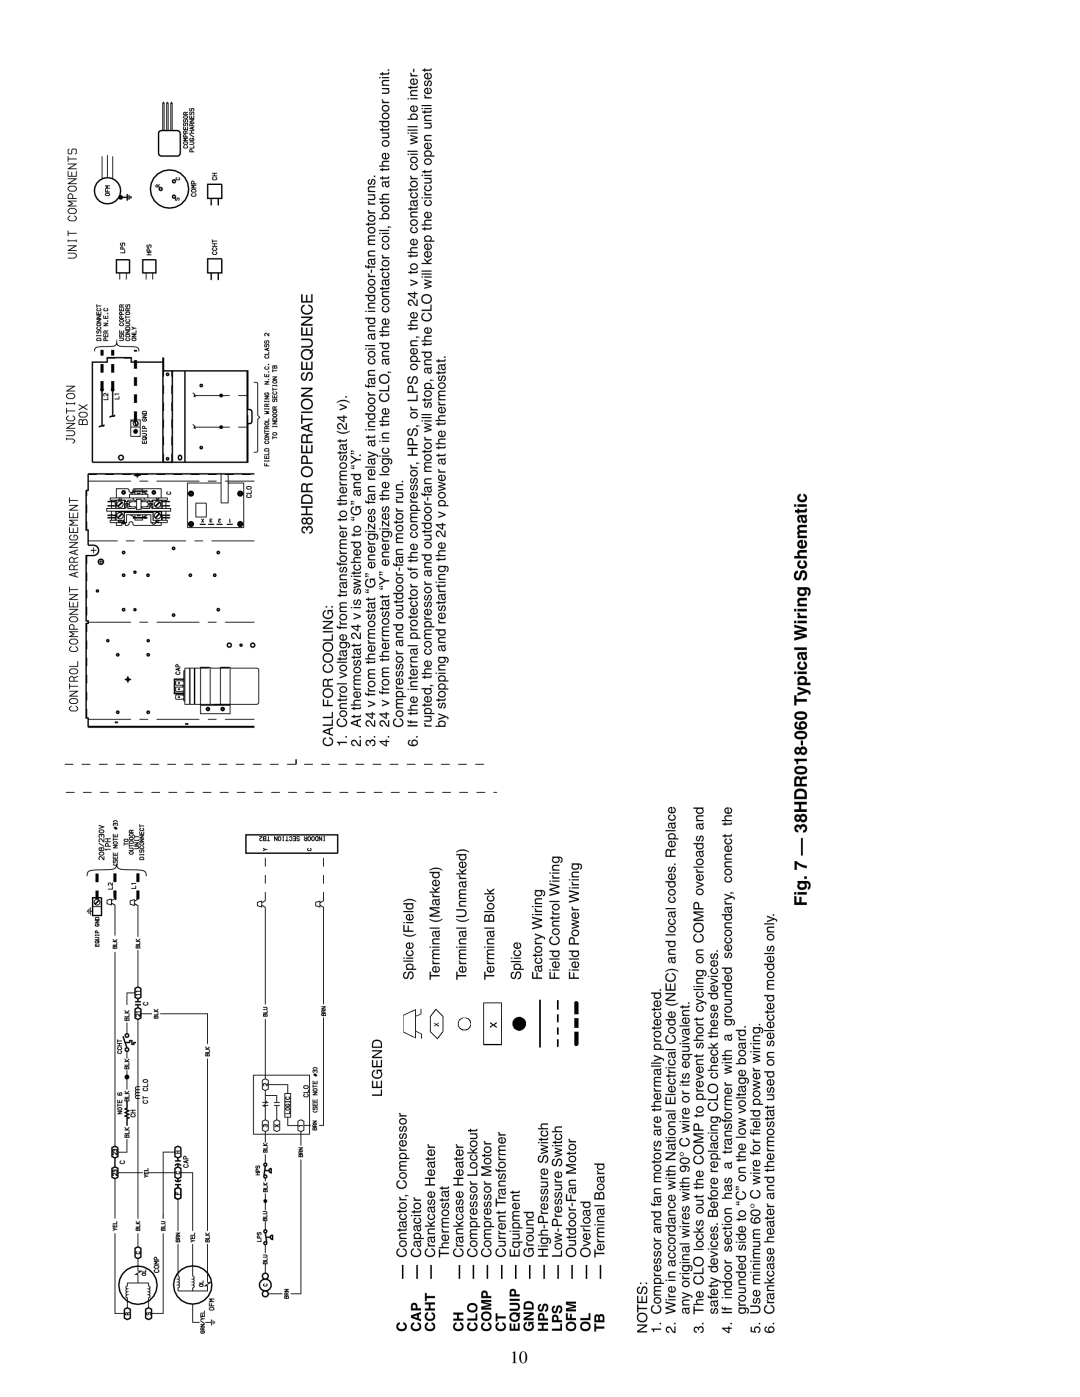 Carrier 38HDF018-036 specifications 38HDR018-060Typical Wiring Schematic, 38HDR OPERATION SEQUENCE 